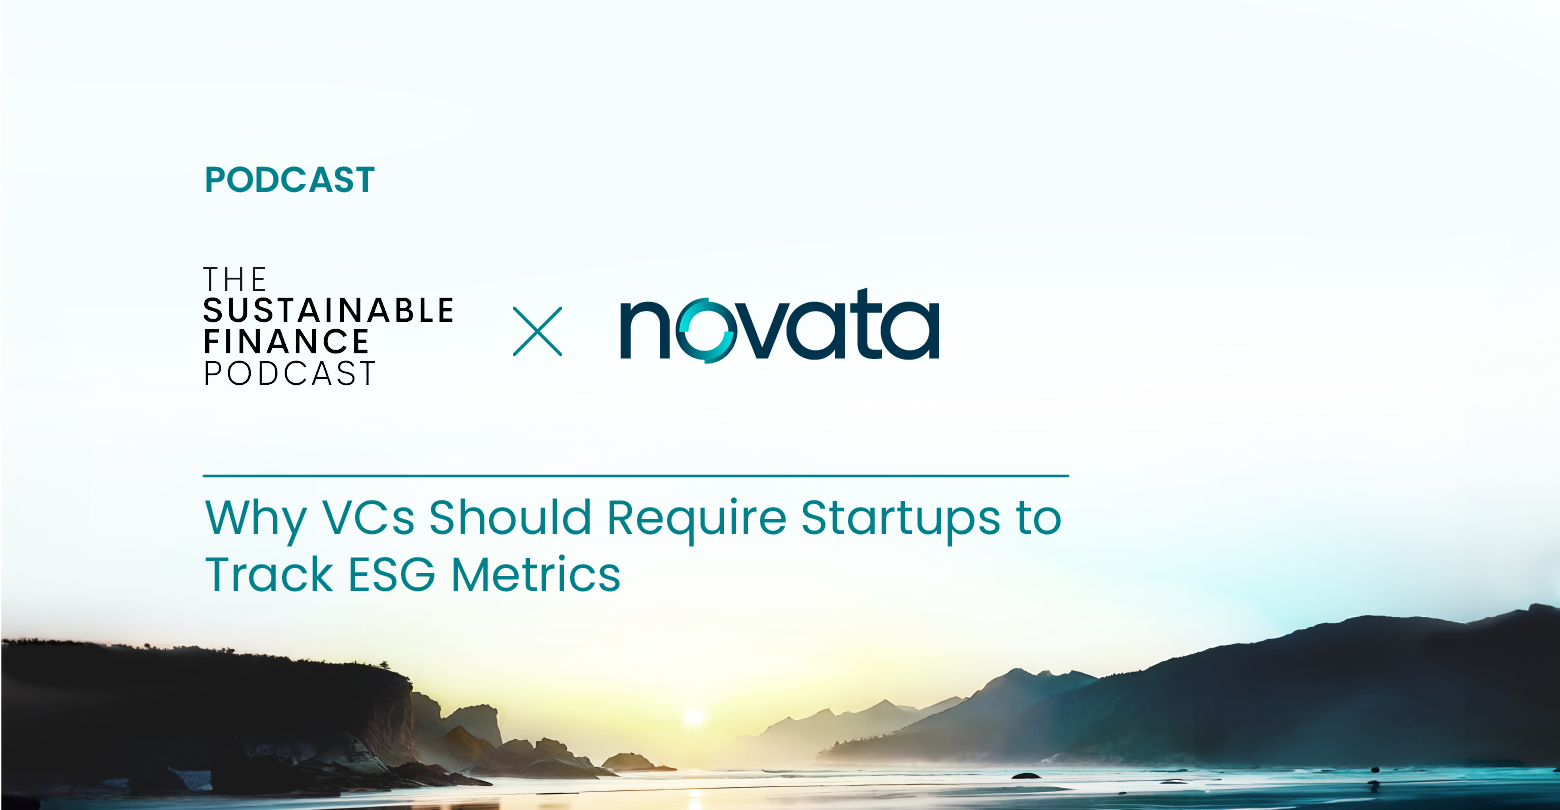 The Sustainable Finance Podcast and Novata: Why VCs Should Require Startups to Track ESG Metrics